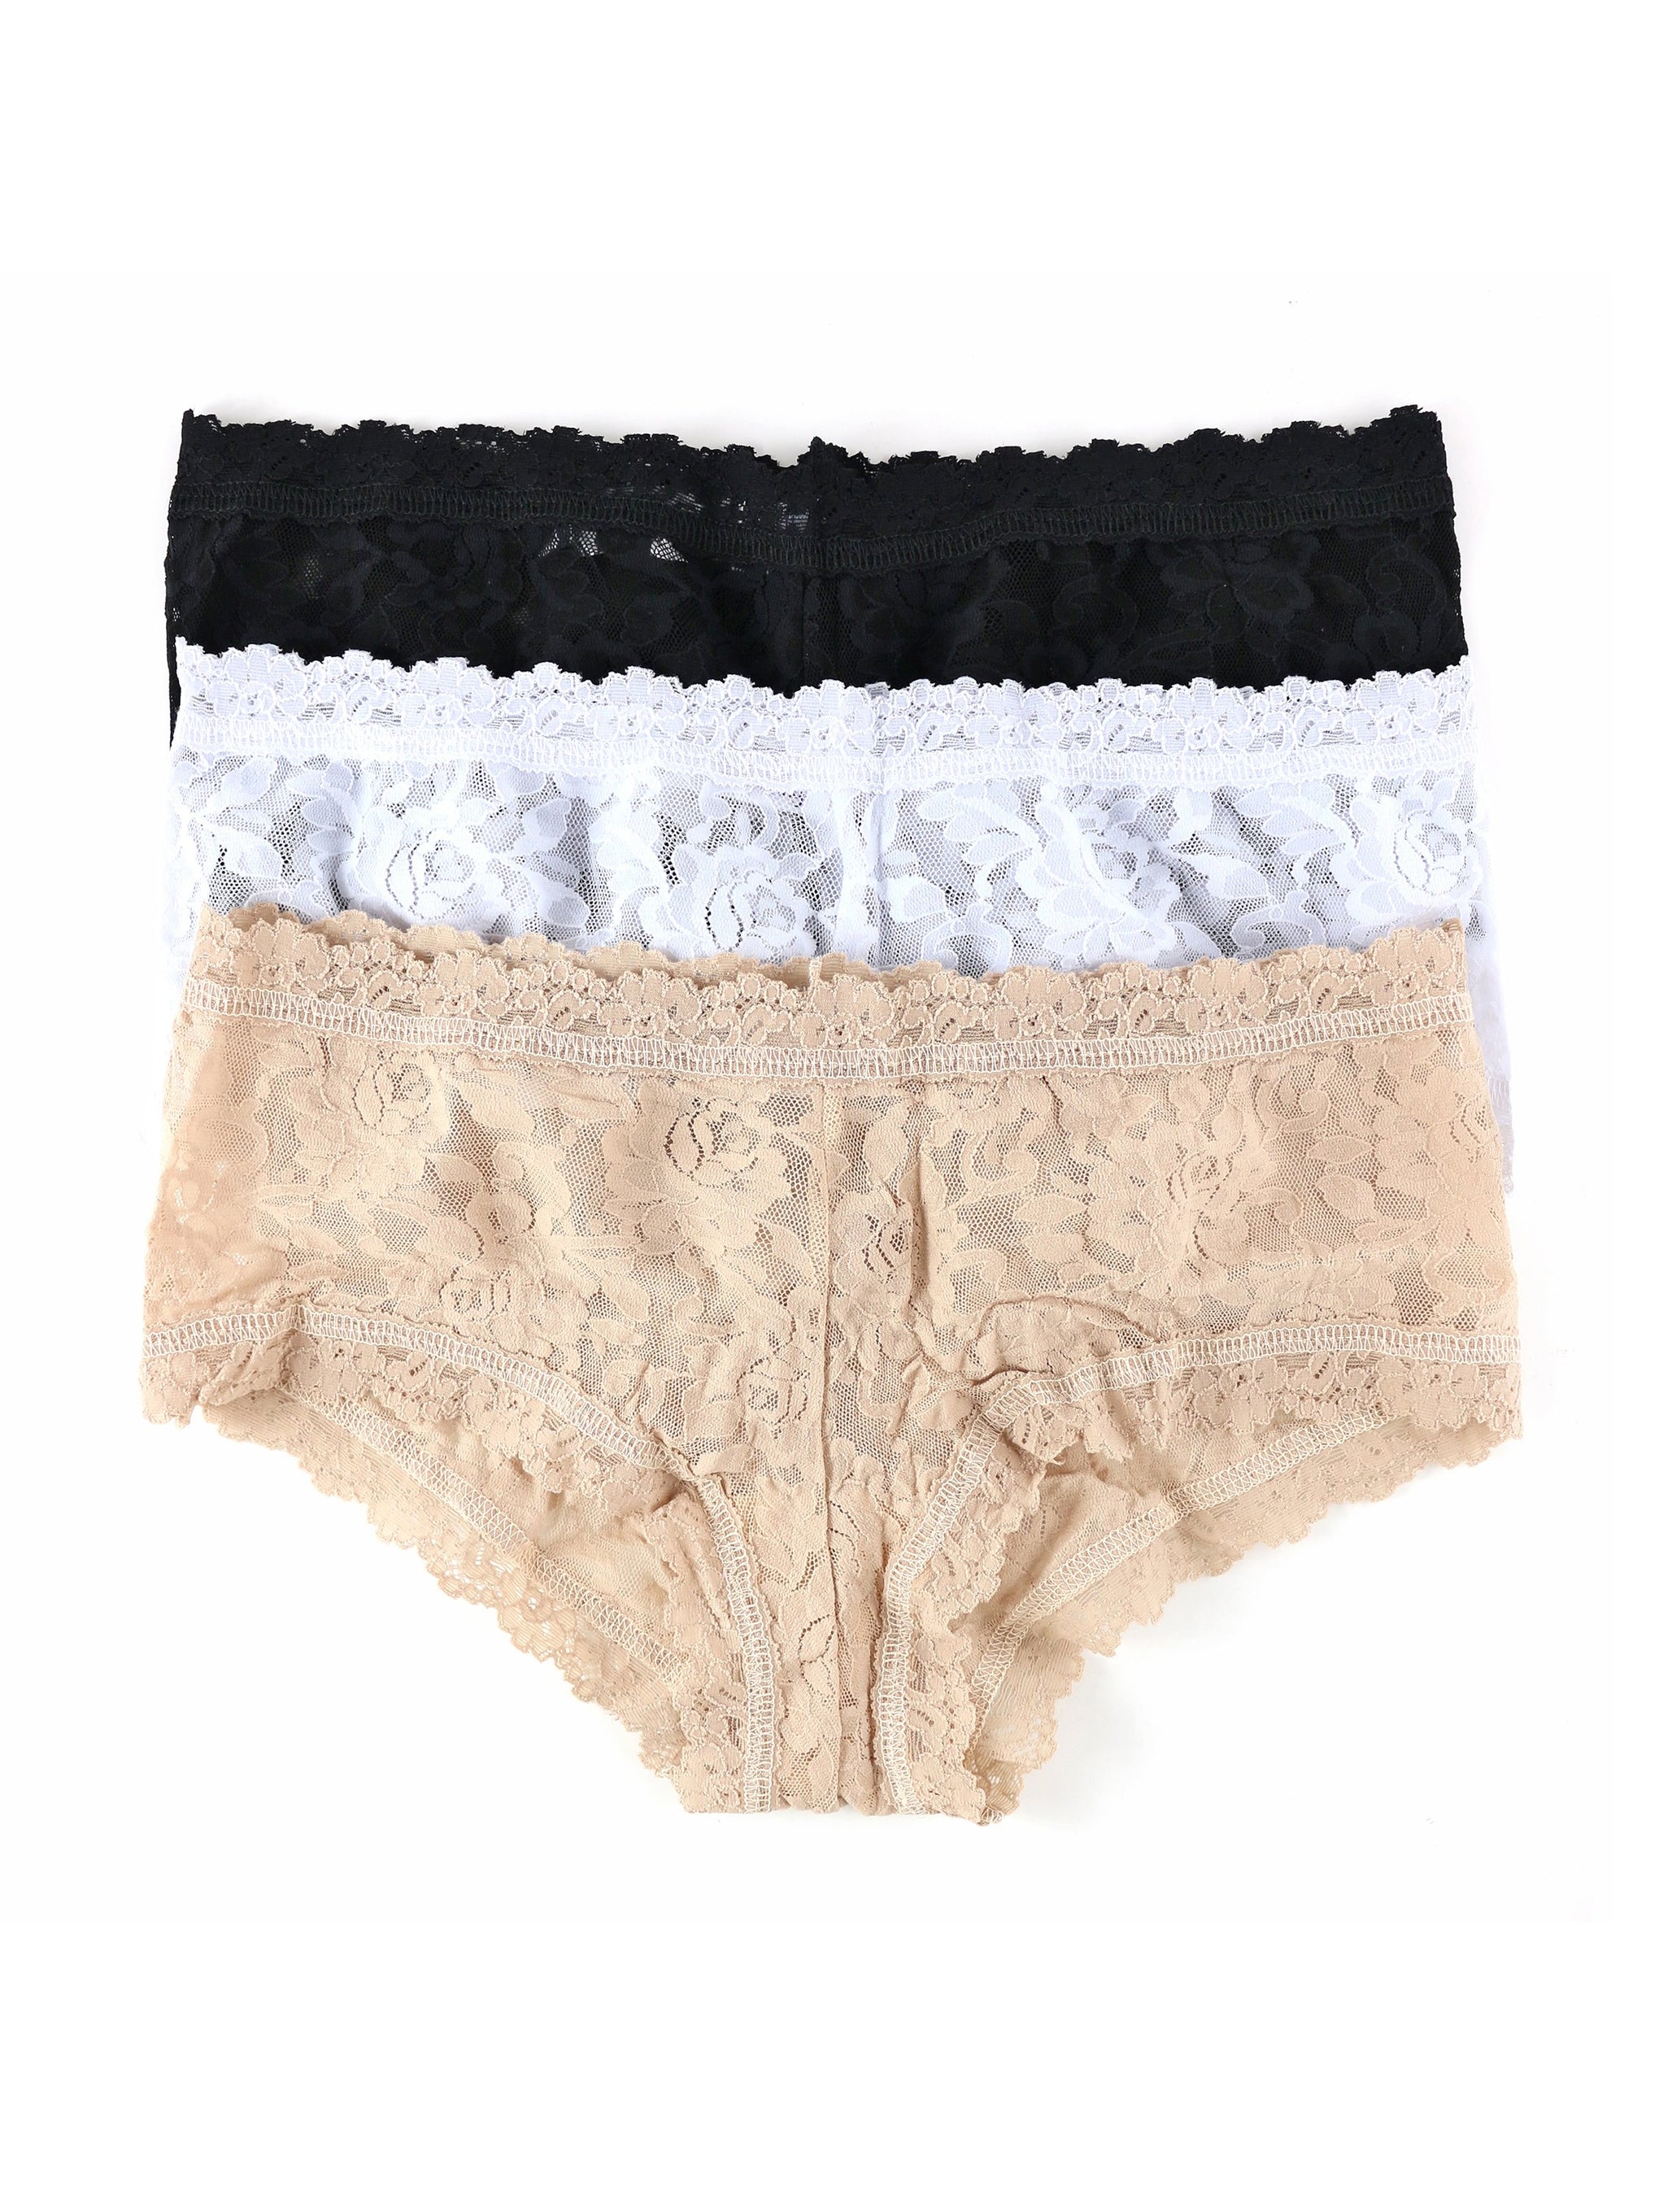 Buy Black Short Cotton and Lace Knickers 4 Pack from Next Poland